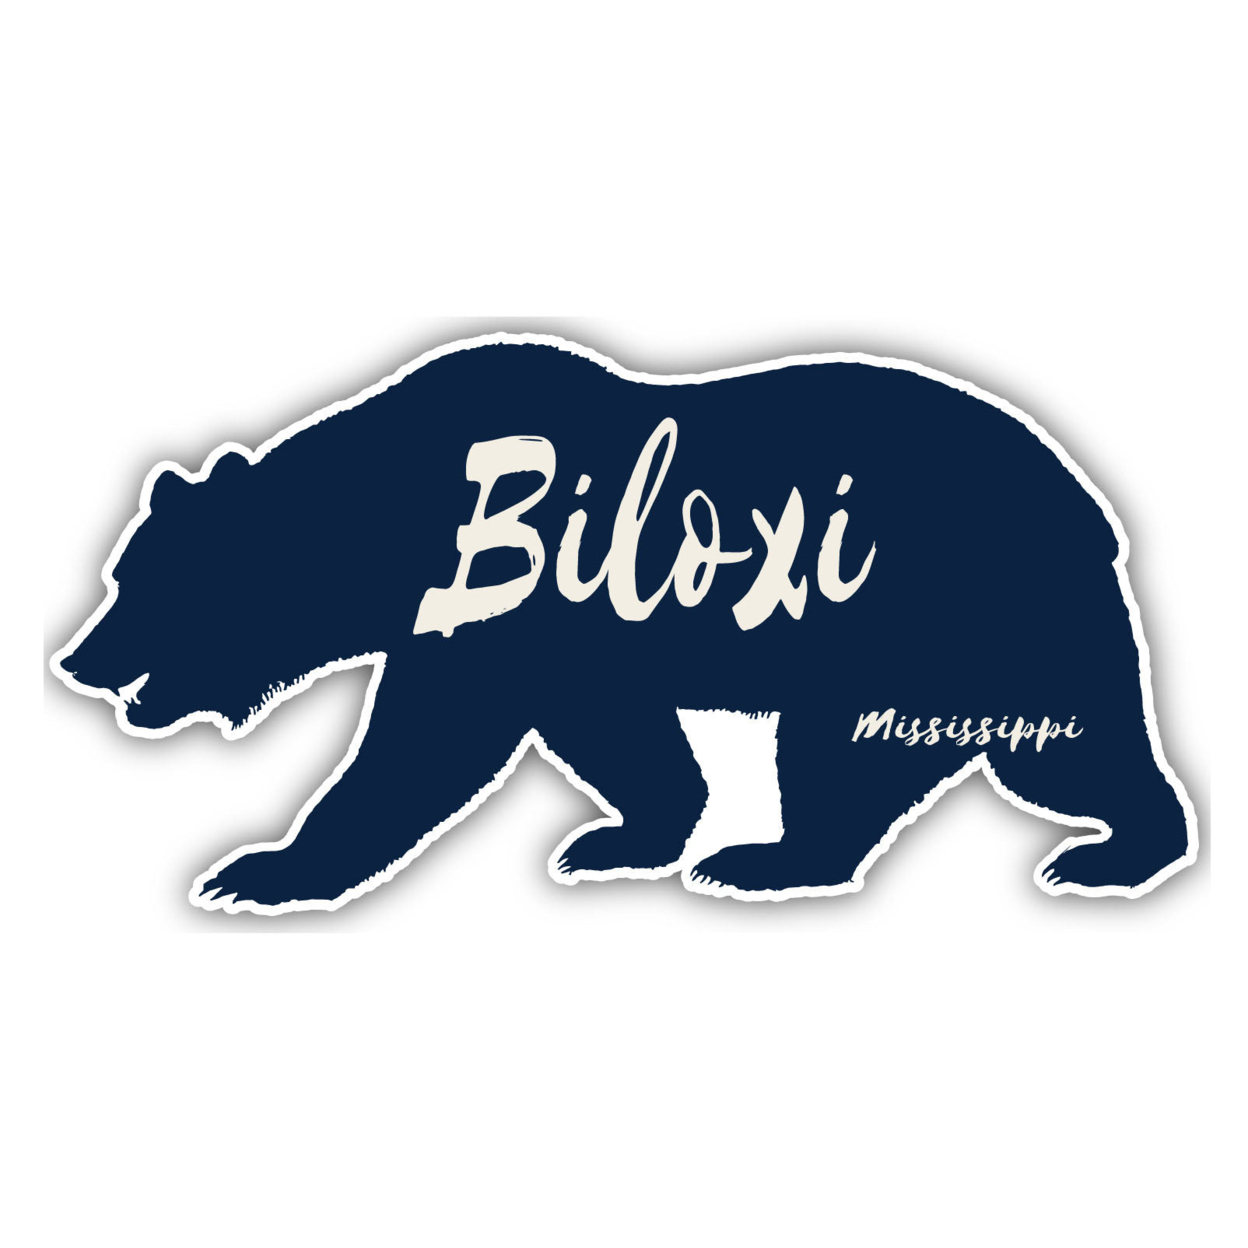 Biloxi Mississippi Souvenir Decorative Stickers (Choose Theme And Size) - 4-Pack, 2-Inch, Bear